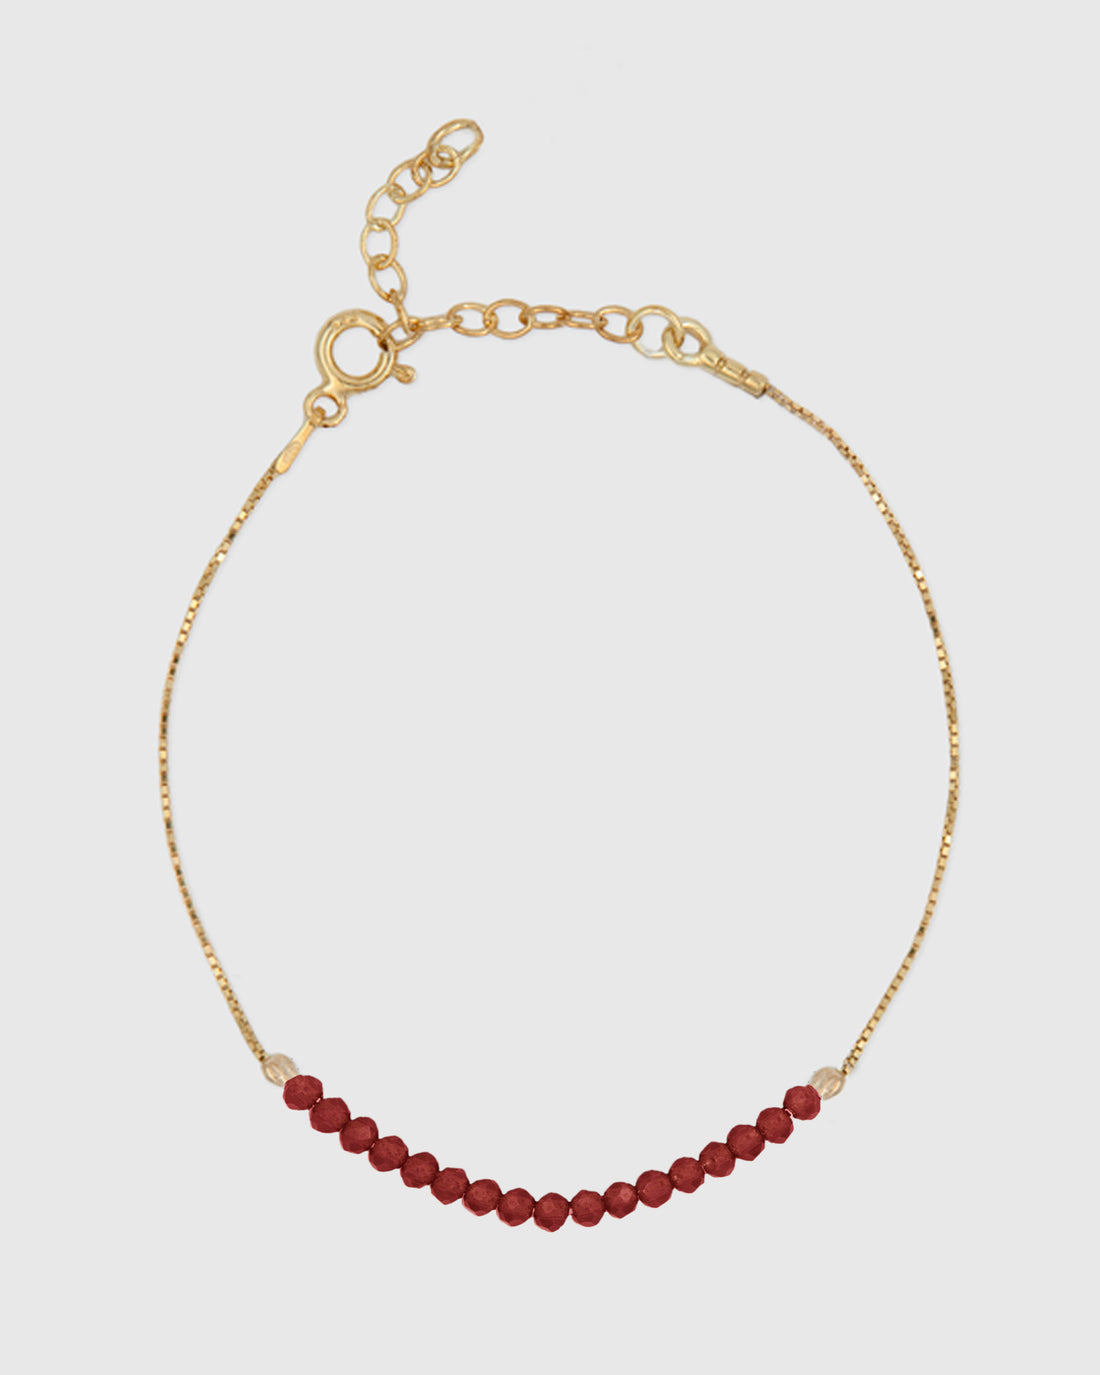 Red Beaded Anklet